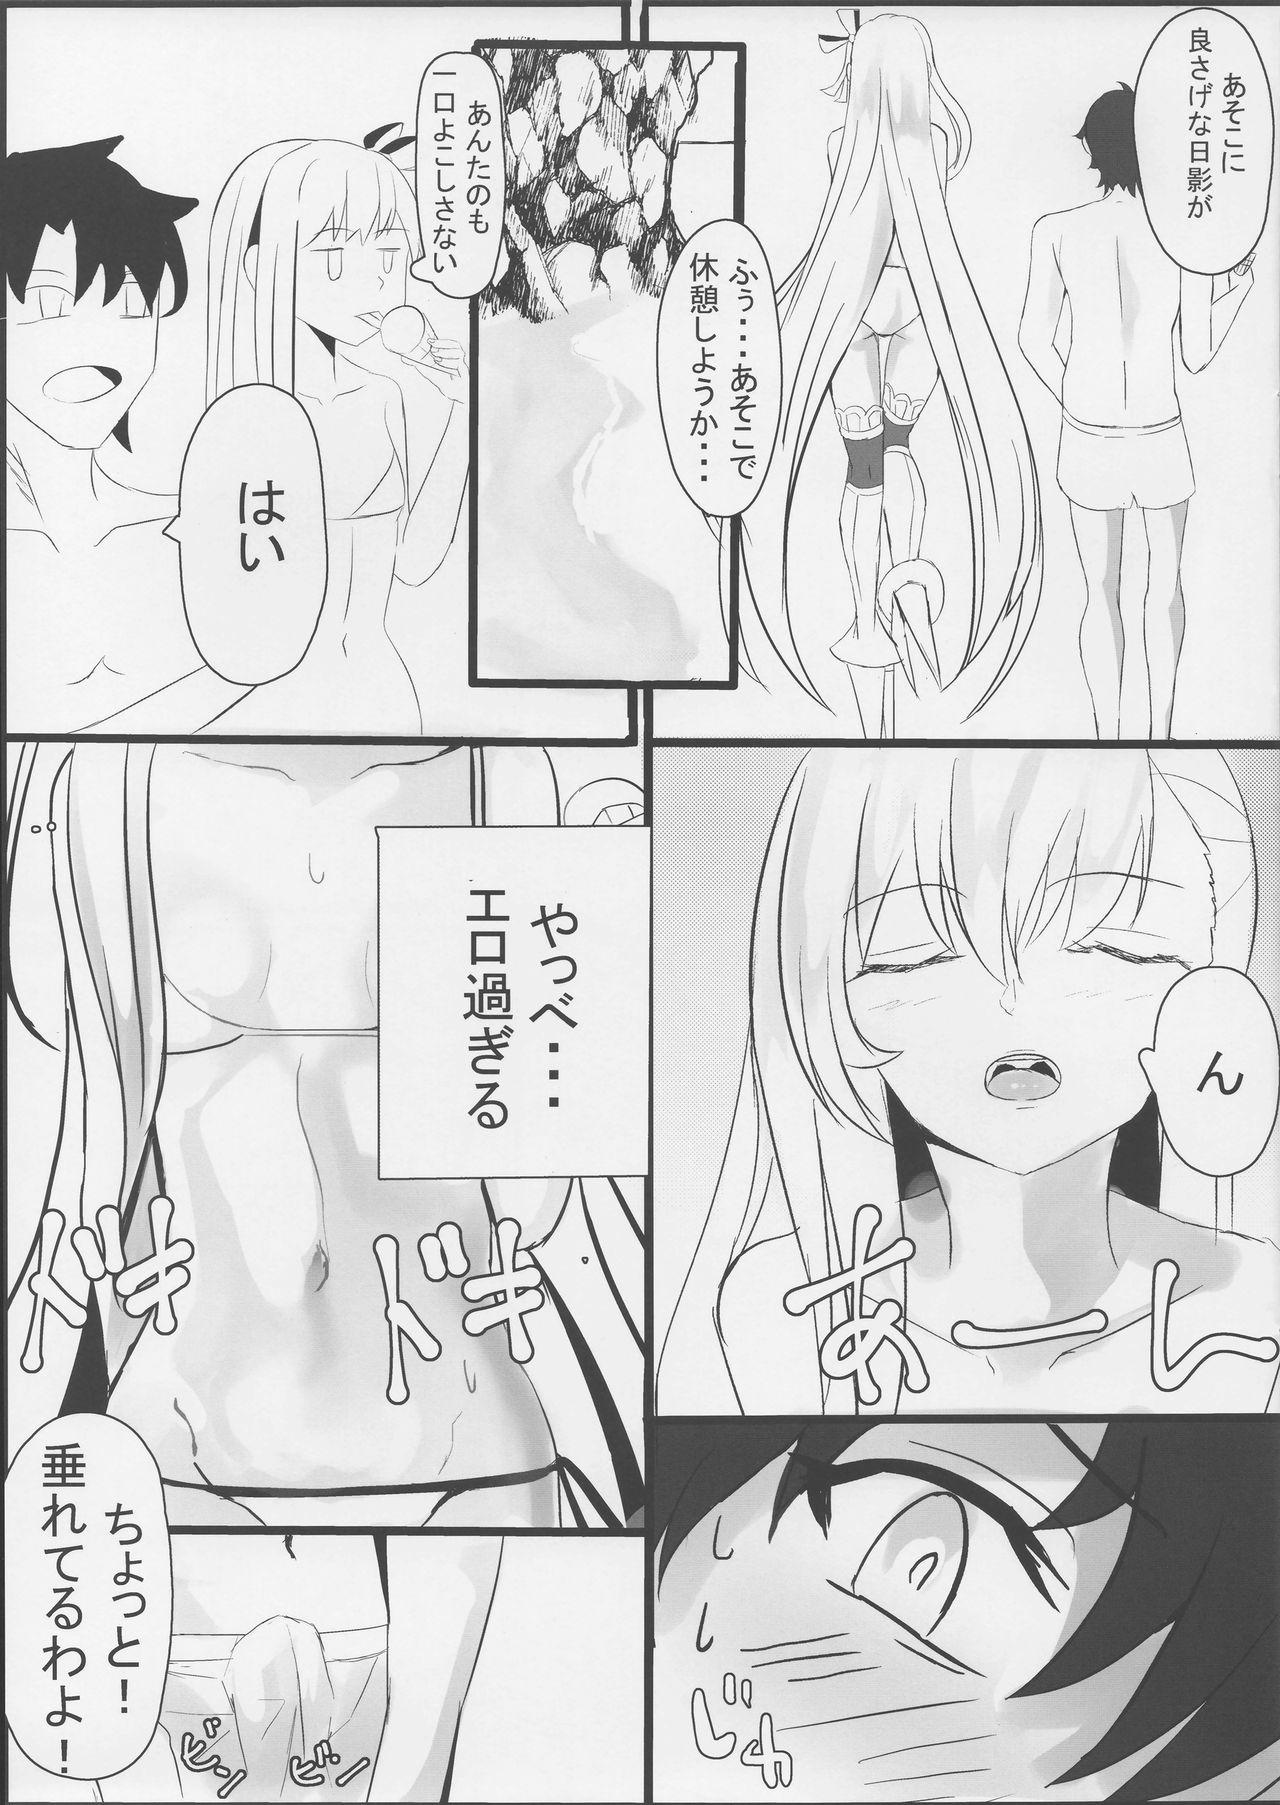 Sexteen Melt down 2 - Fate grand order Funny - Page 6